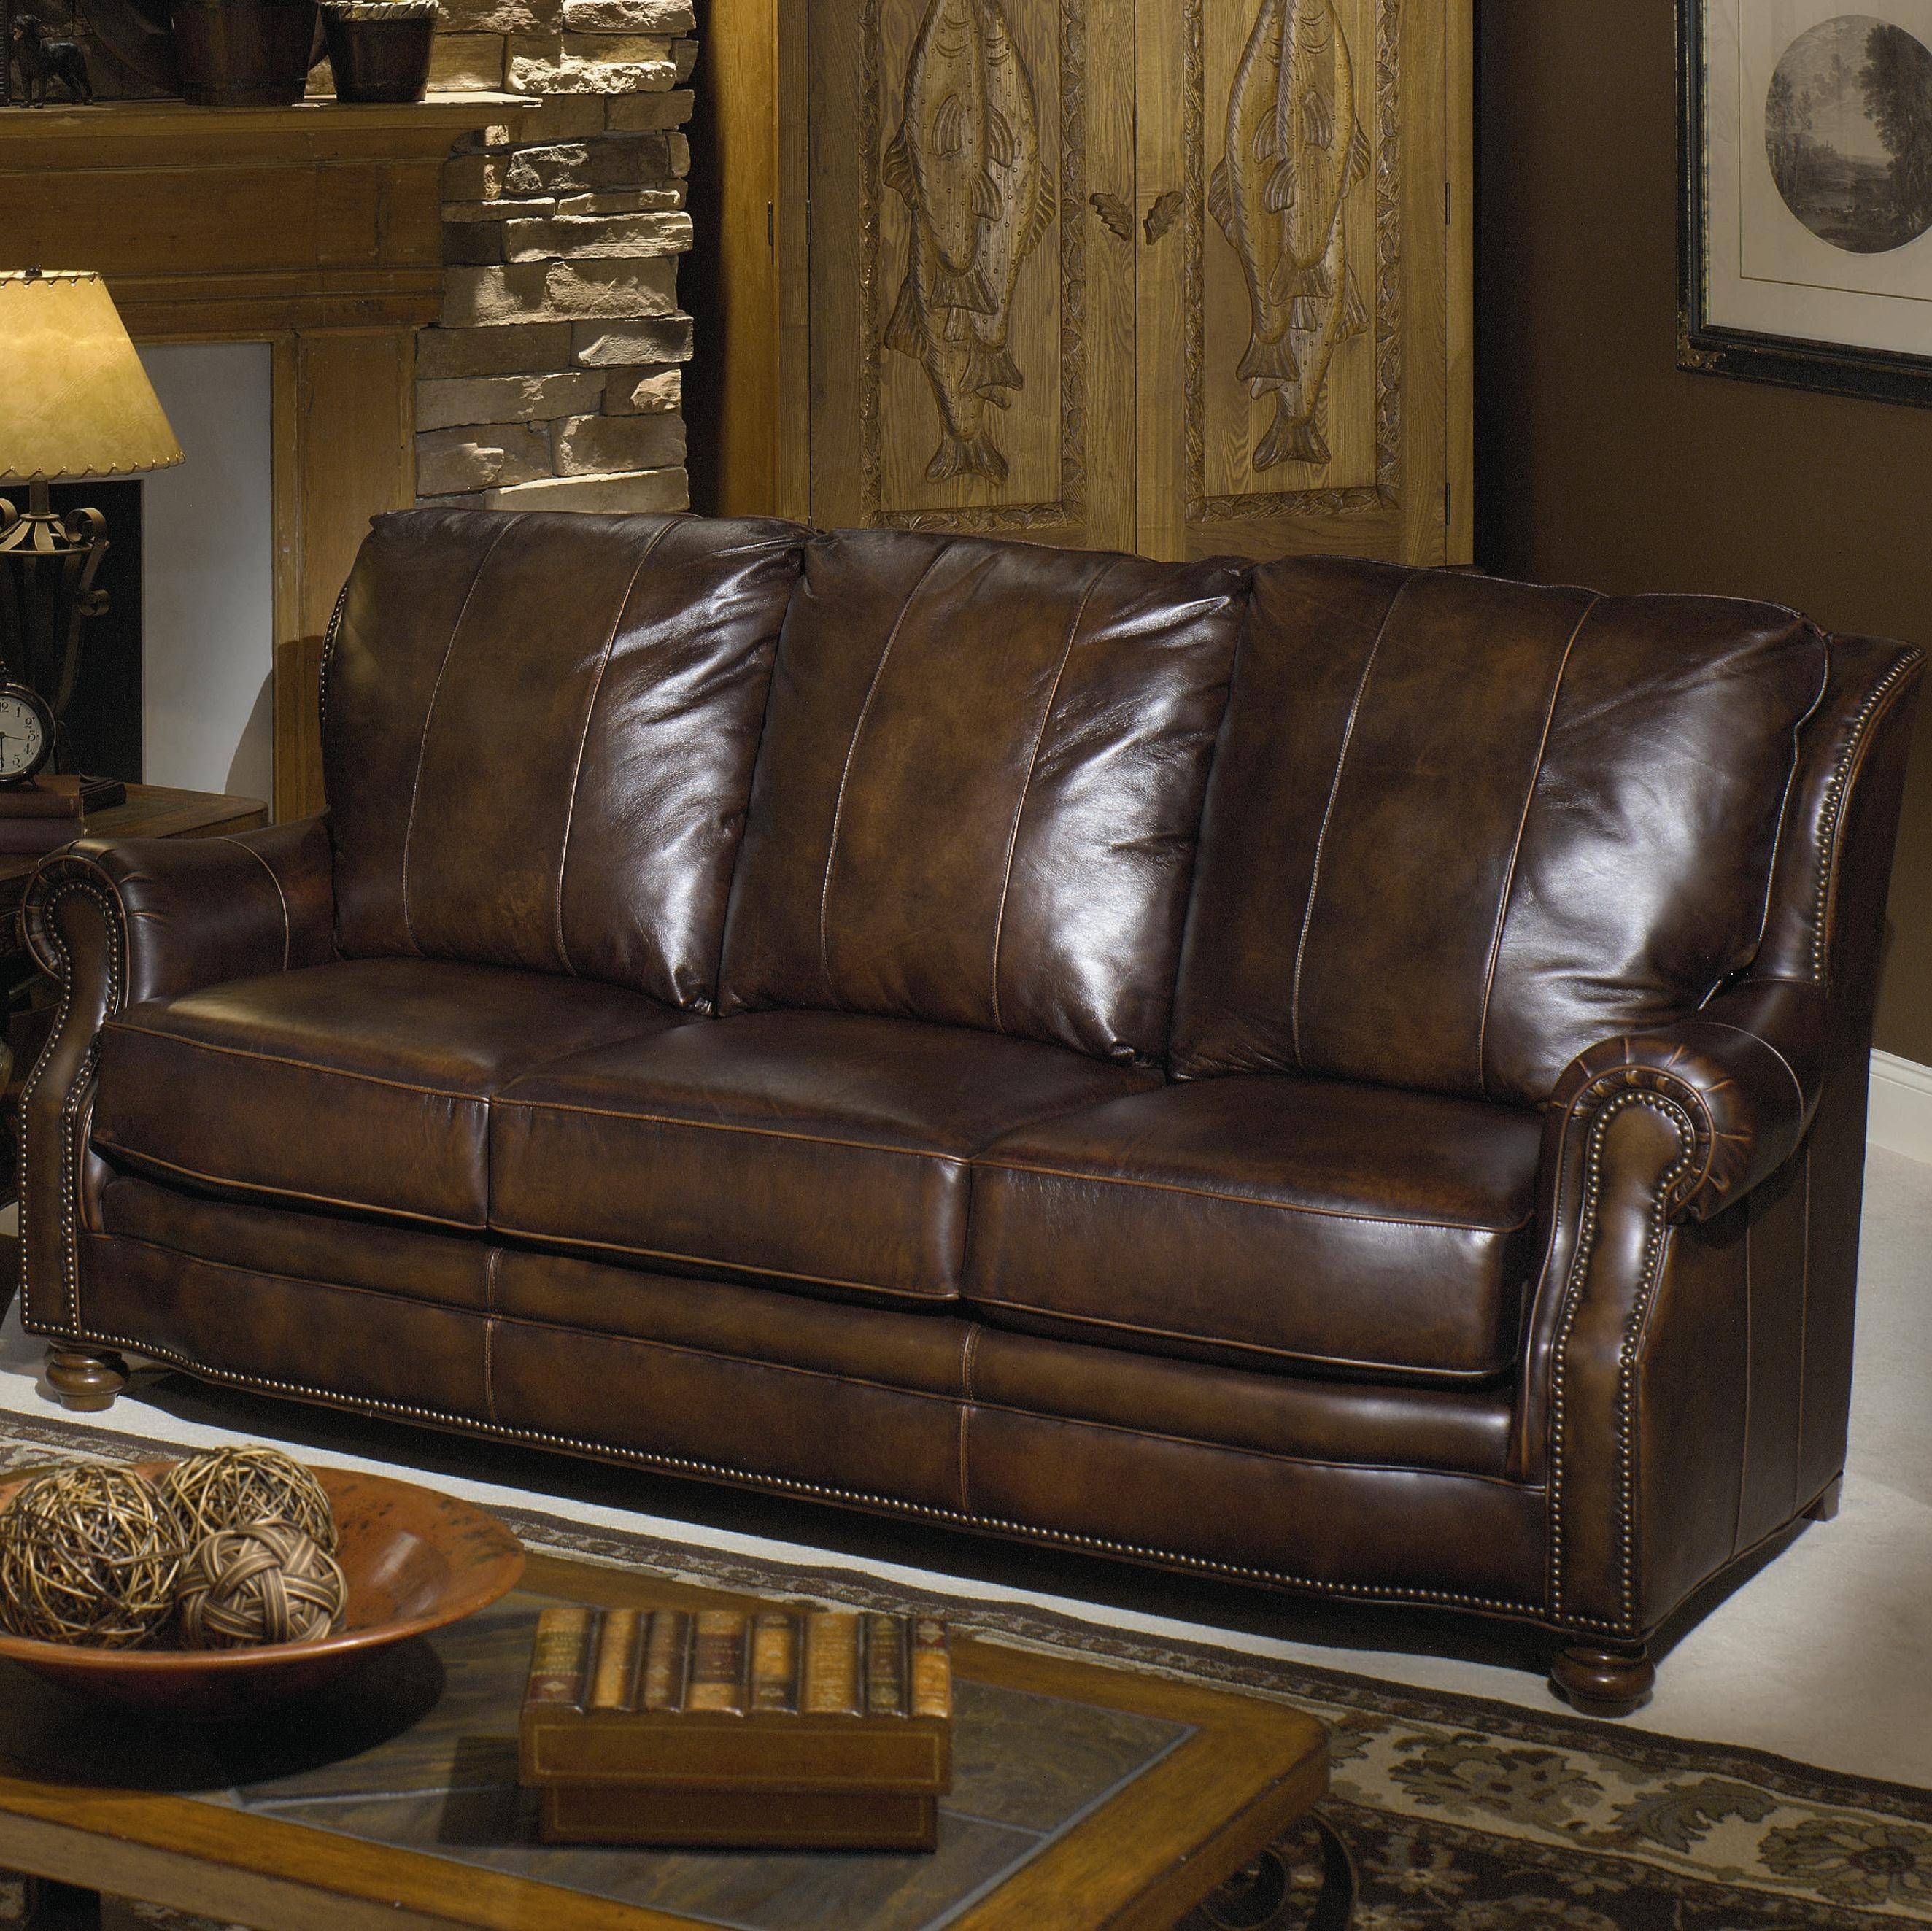 Leather Sofa With Nail Best Nailhead Leather | Atme For Brown Leather Sofas With Nailhead Trim (View 9 of 15)